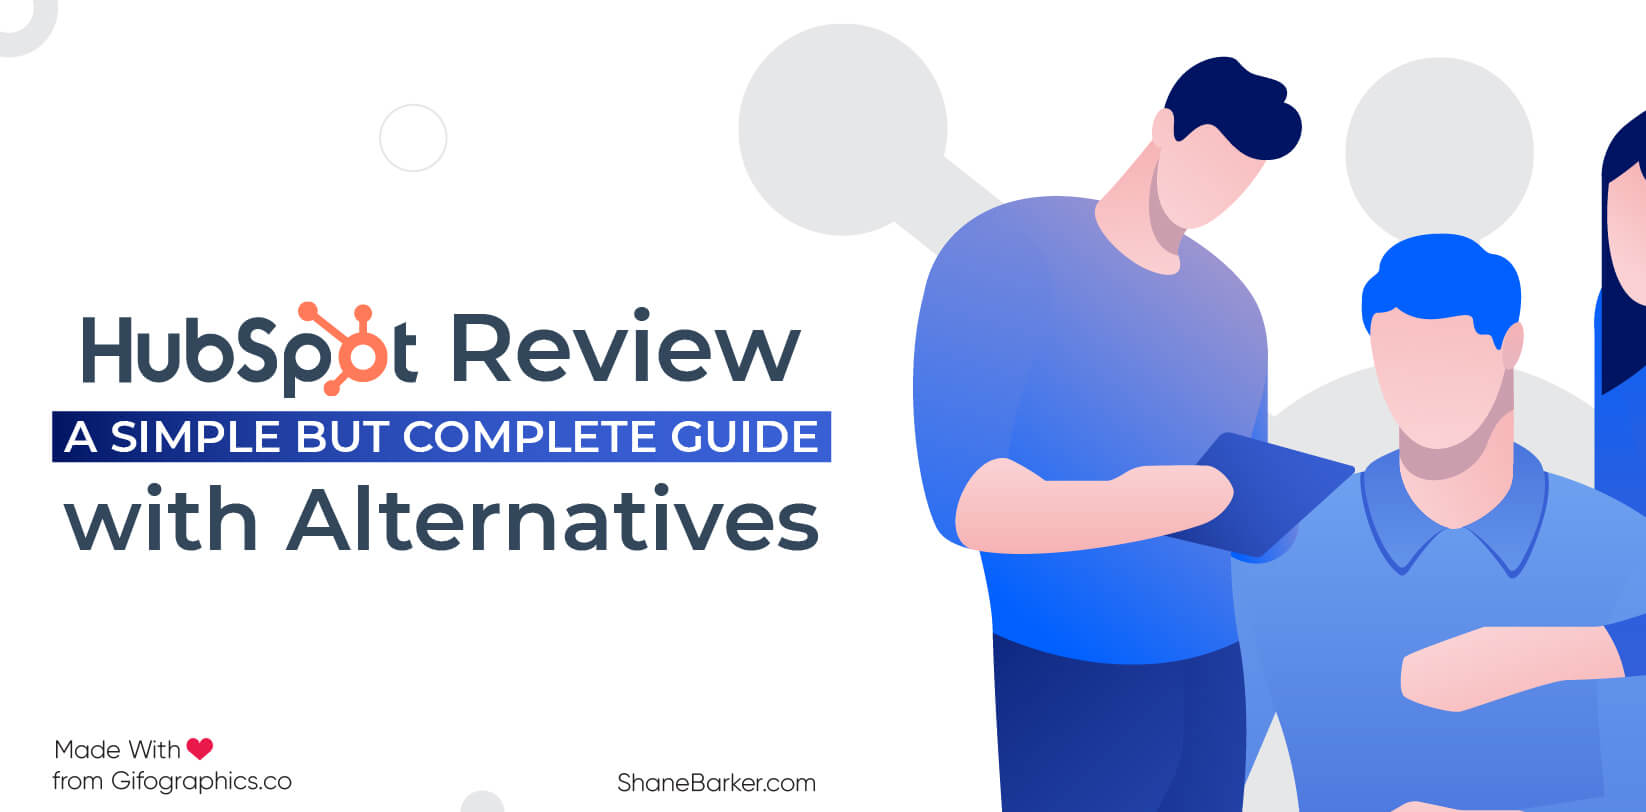 hubspot review a simple but complete guide with alternatives